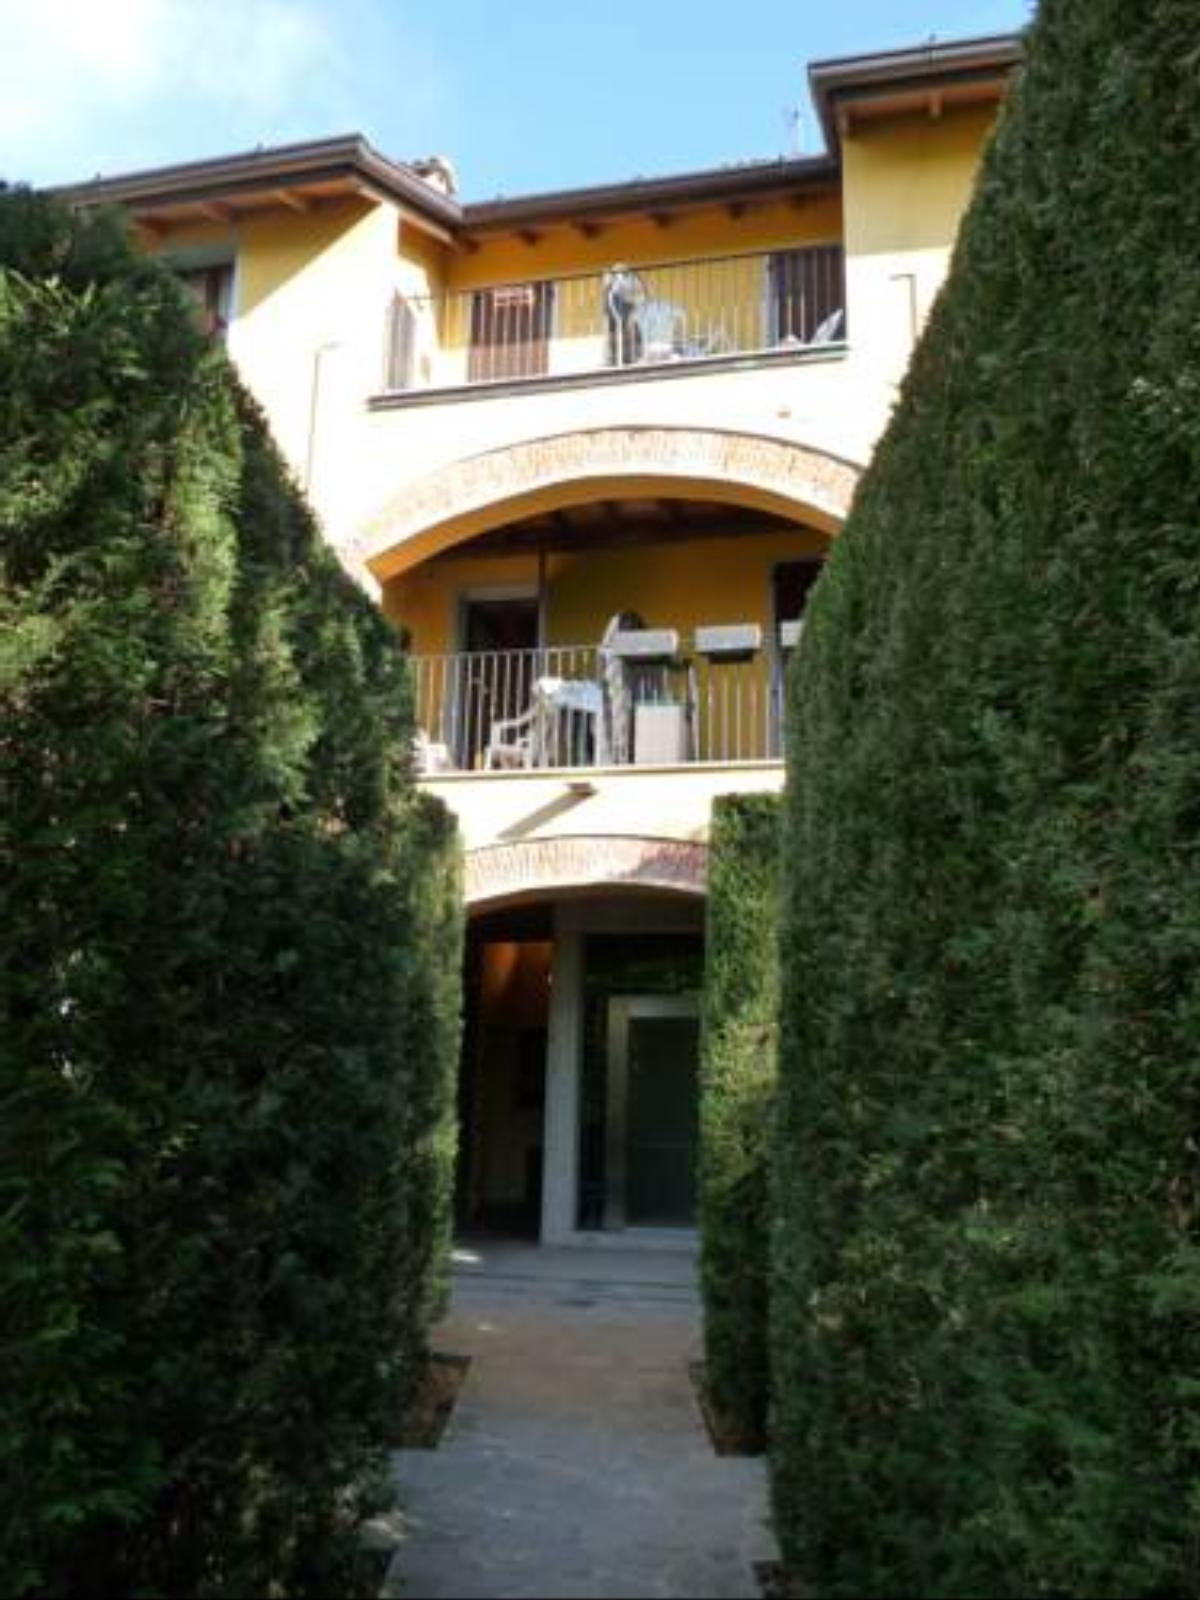 Residence Cascina Roncate